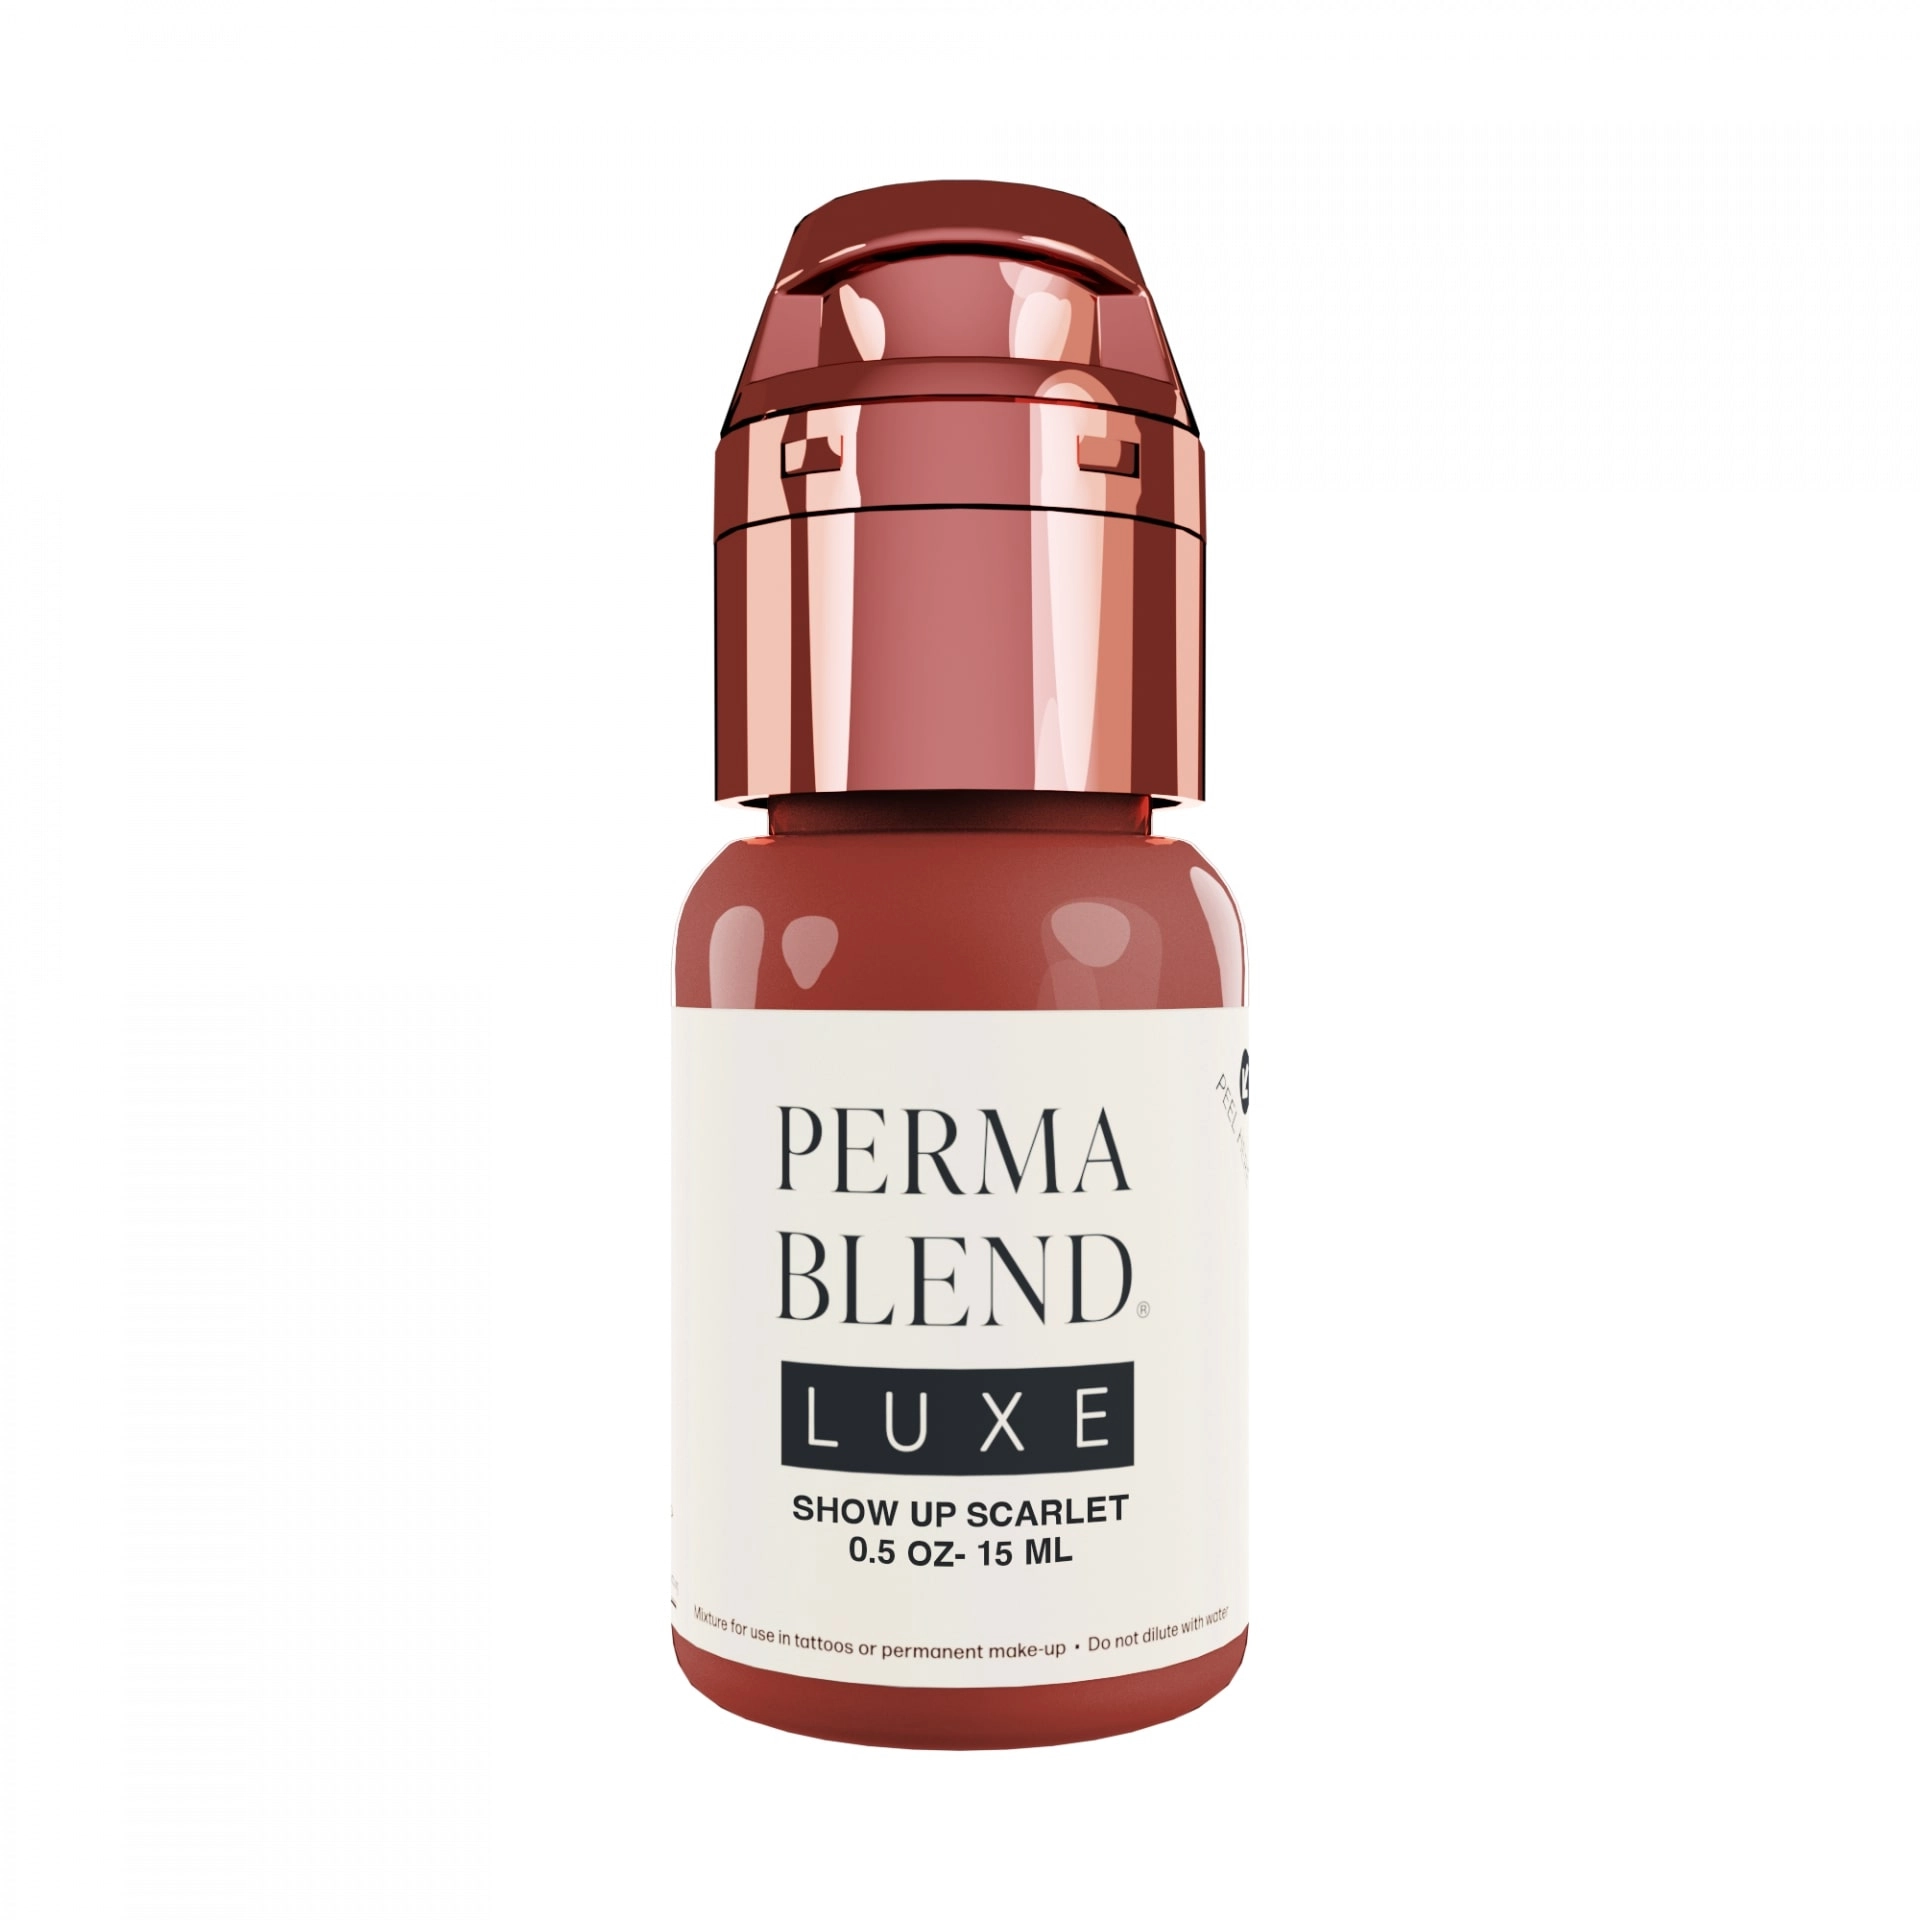 Perma Blend Luxe PMU Pigment - Show Up Scarlet (15 ml)